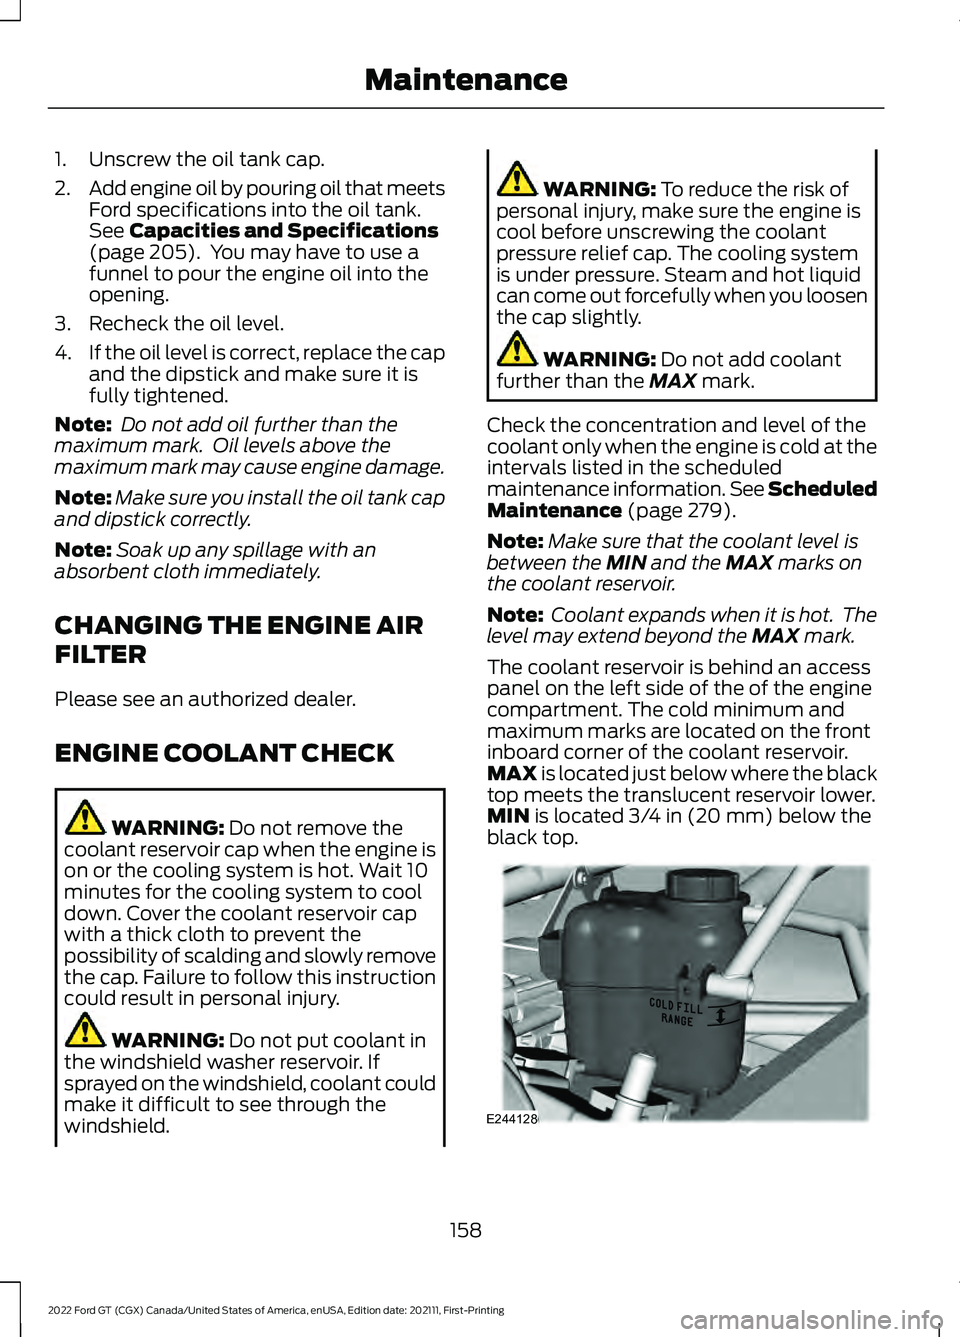 FORD GT 2022  Owners Manual 1. Unscrew the oil tank cap.
2.
Add engine oil by pouring oil that meets
Ford specifications into the oil tank.
See Capacities and Specifications
(page 205).  You may have to use a
funnel to pour the 